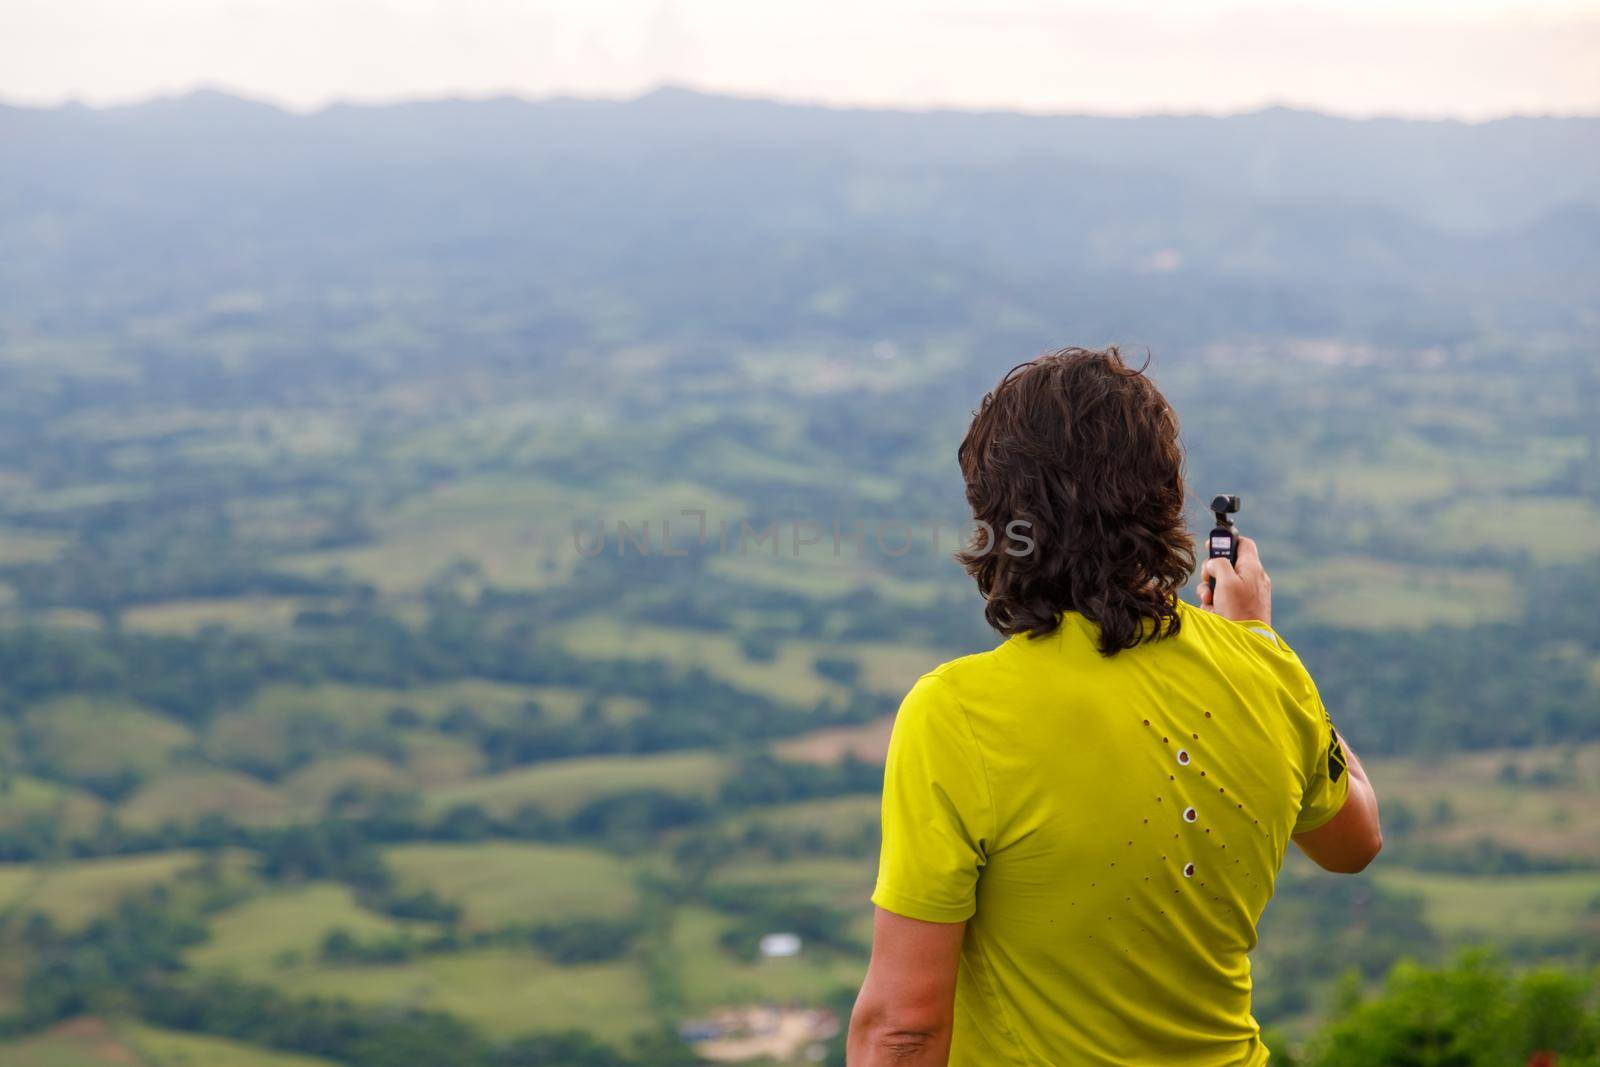 A long-haired man filming a video with a small video camera, a picturesque valley. Dominican Republic on the mountain.